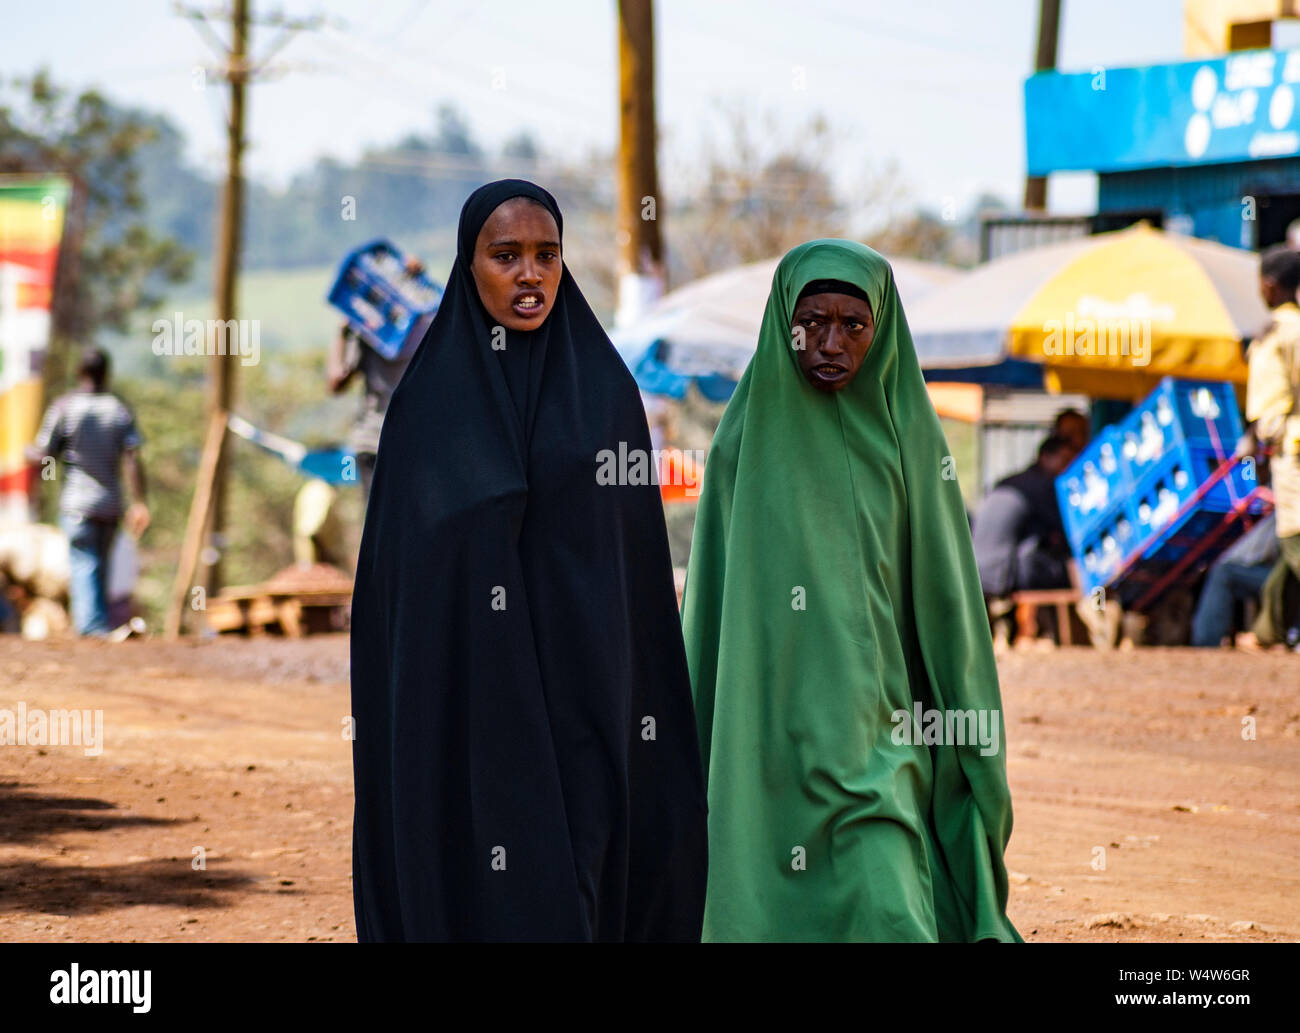 Two young women dressed in Islamic chador dress in Ethiopia Stock Photo